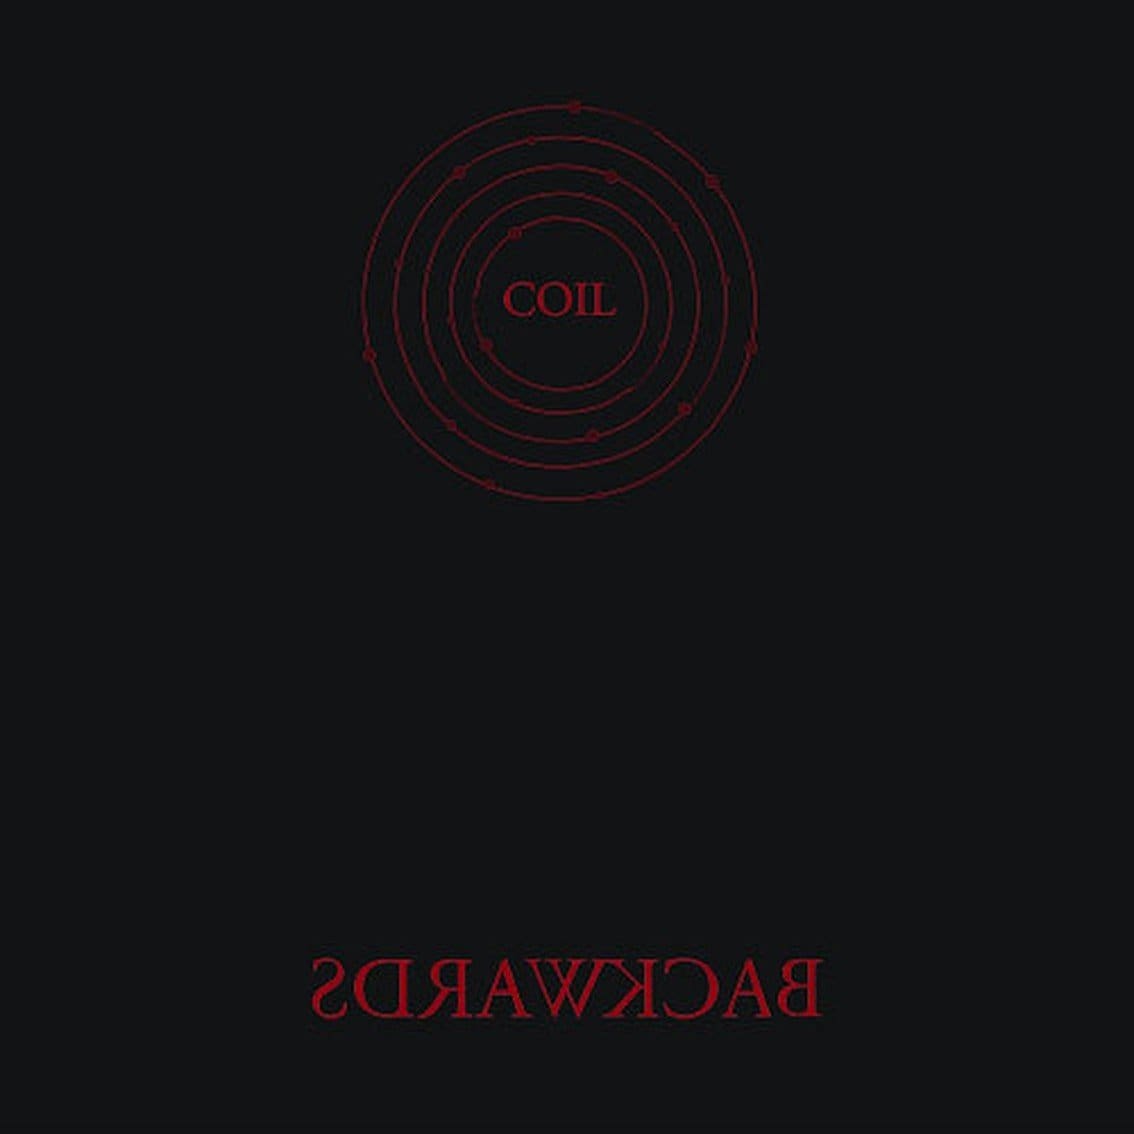 Coil's original 'Backward' album - partially recorded in the Nothing studios of Trent Reznor (Nine Inch Nails) - finally released as double vinyl and CD release - pre-orders available now